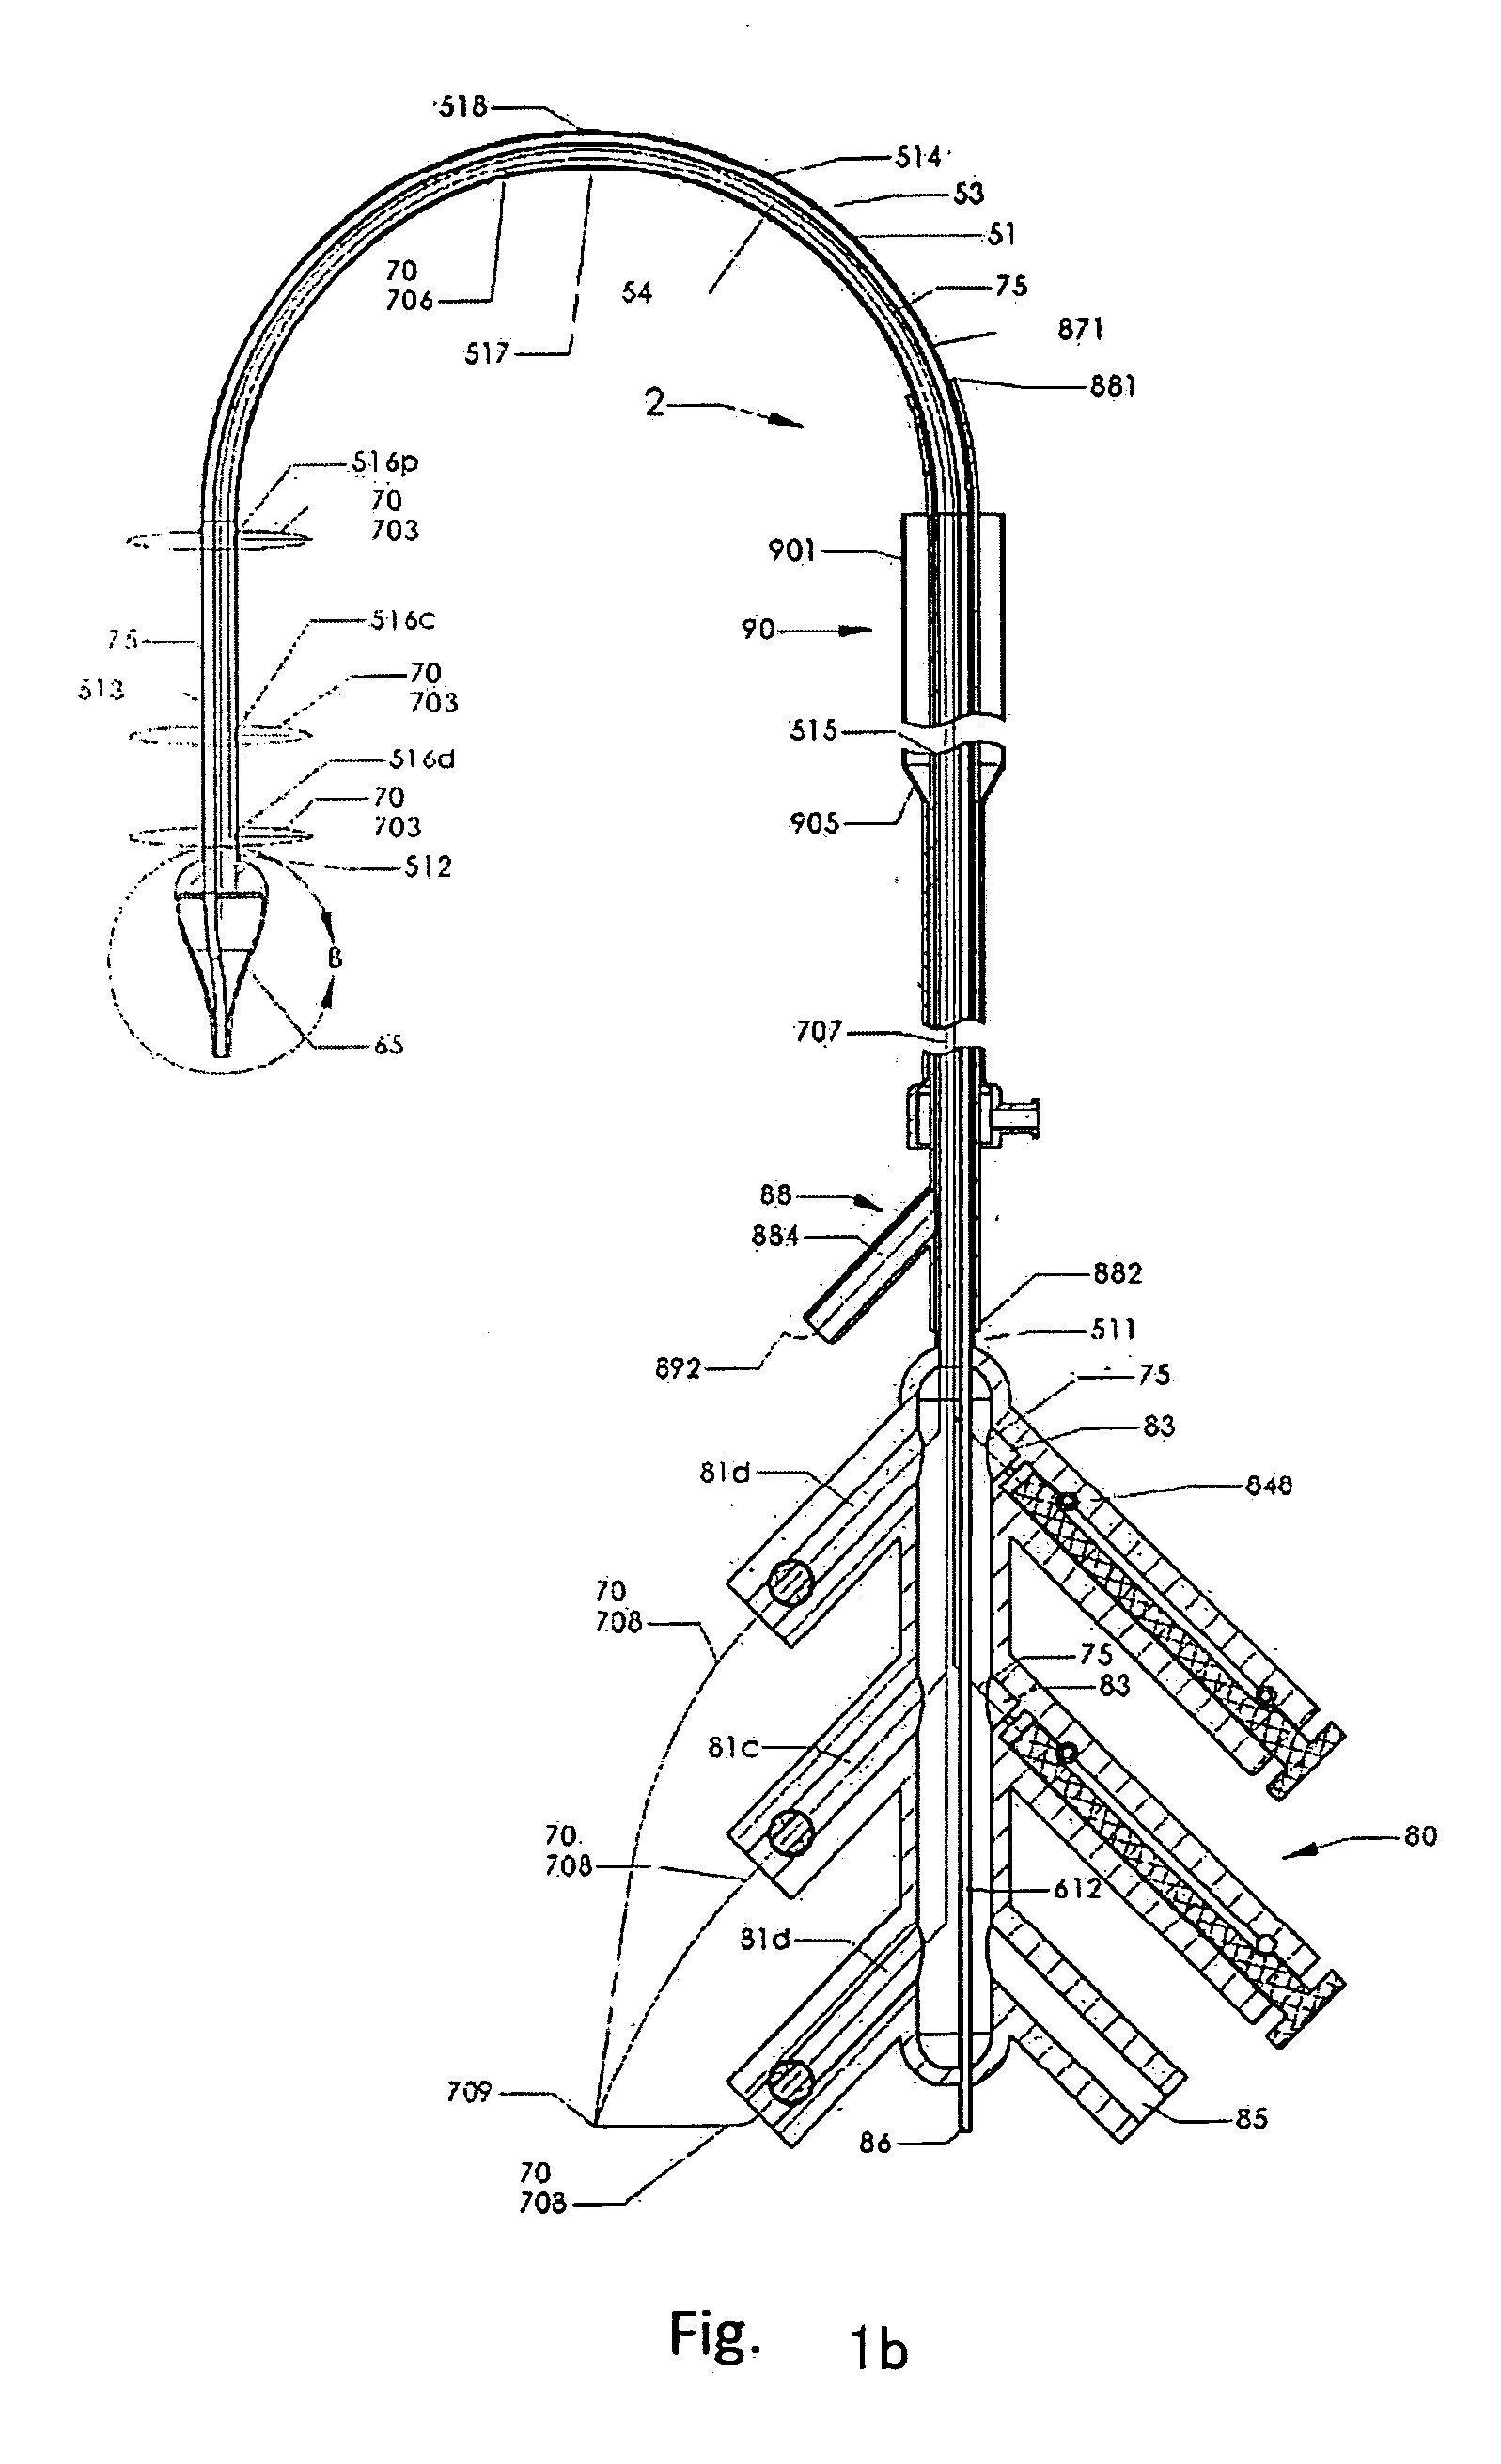 Delivery Device for Delivering a Self-Expanding Stent